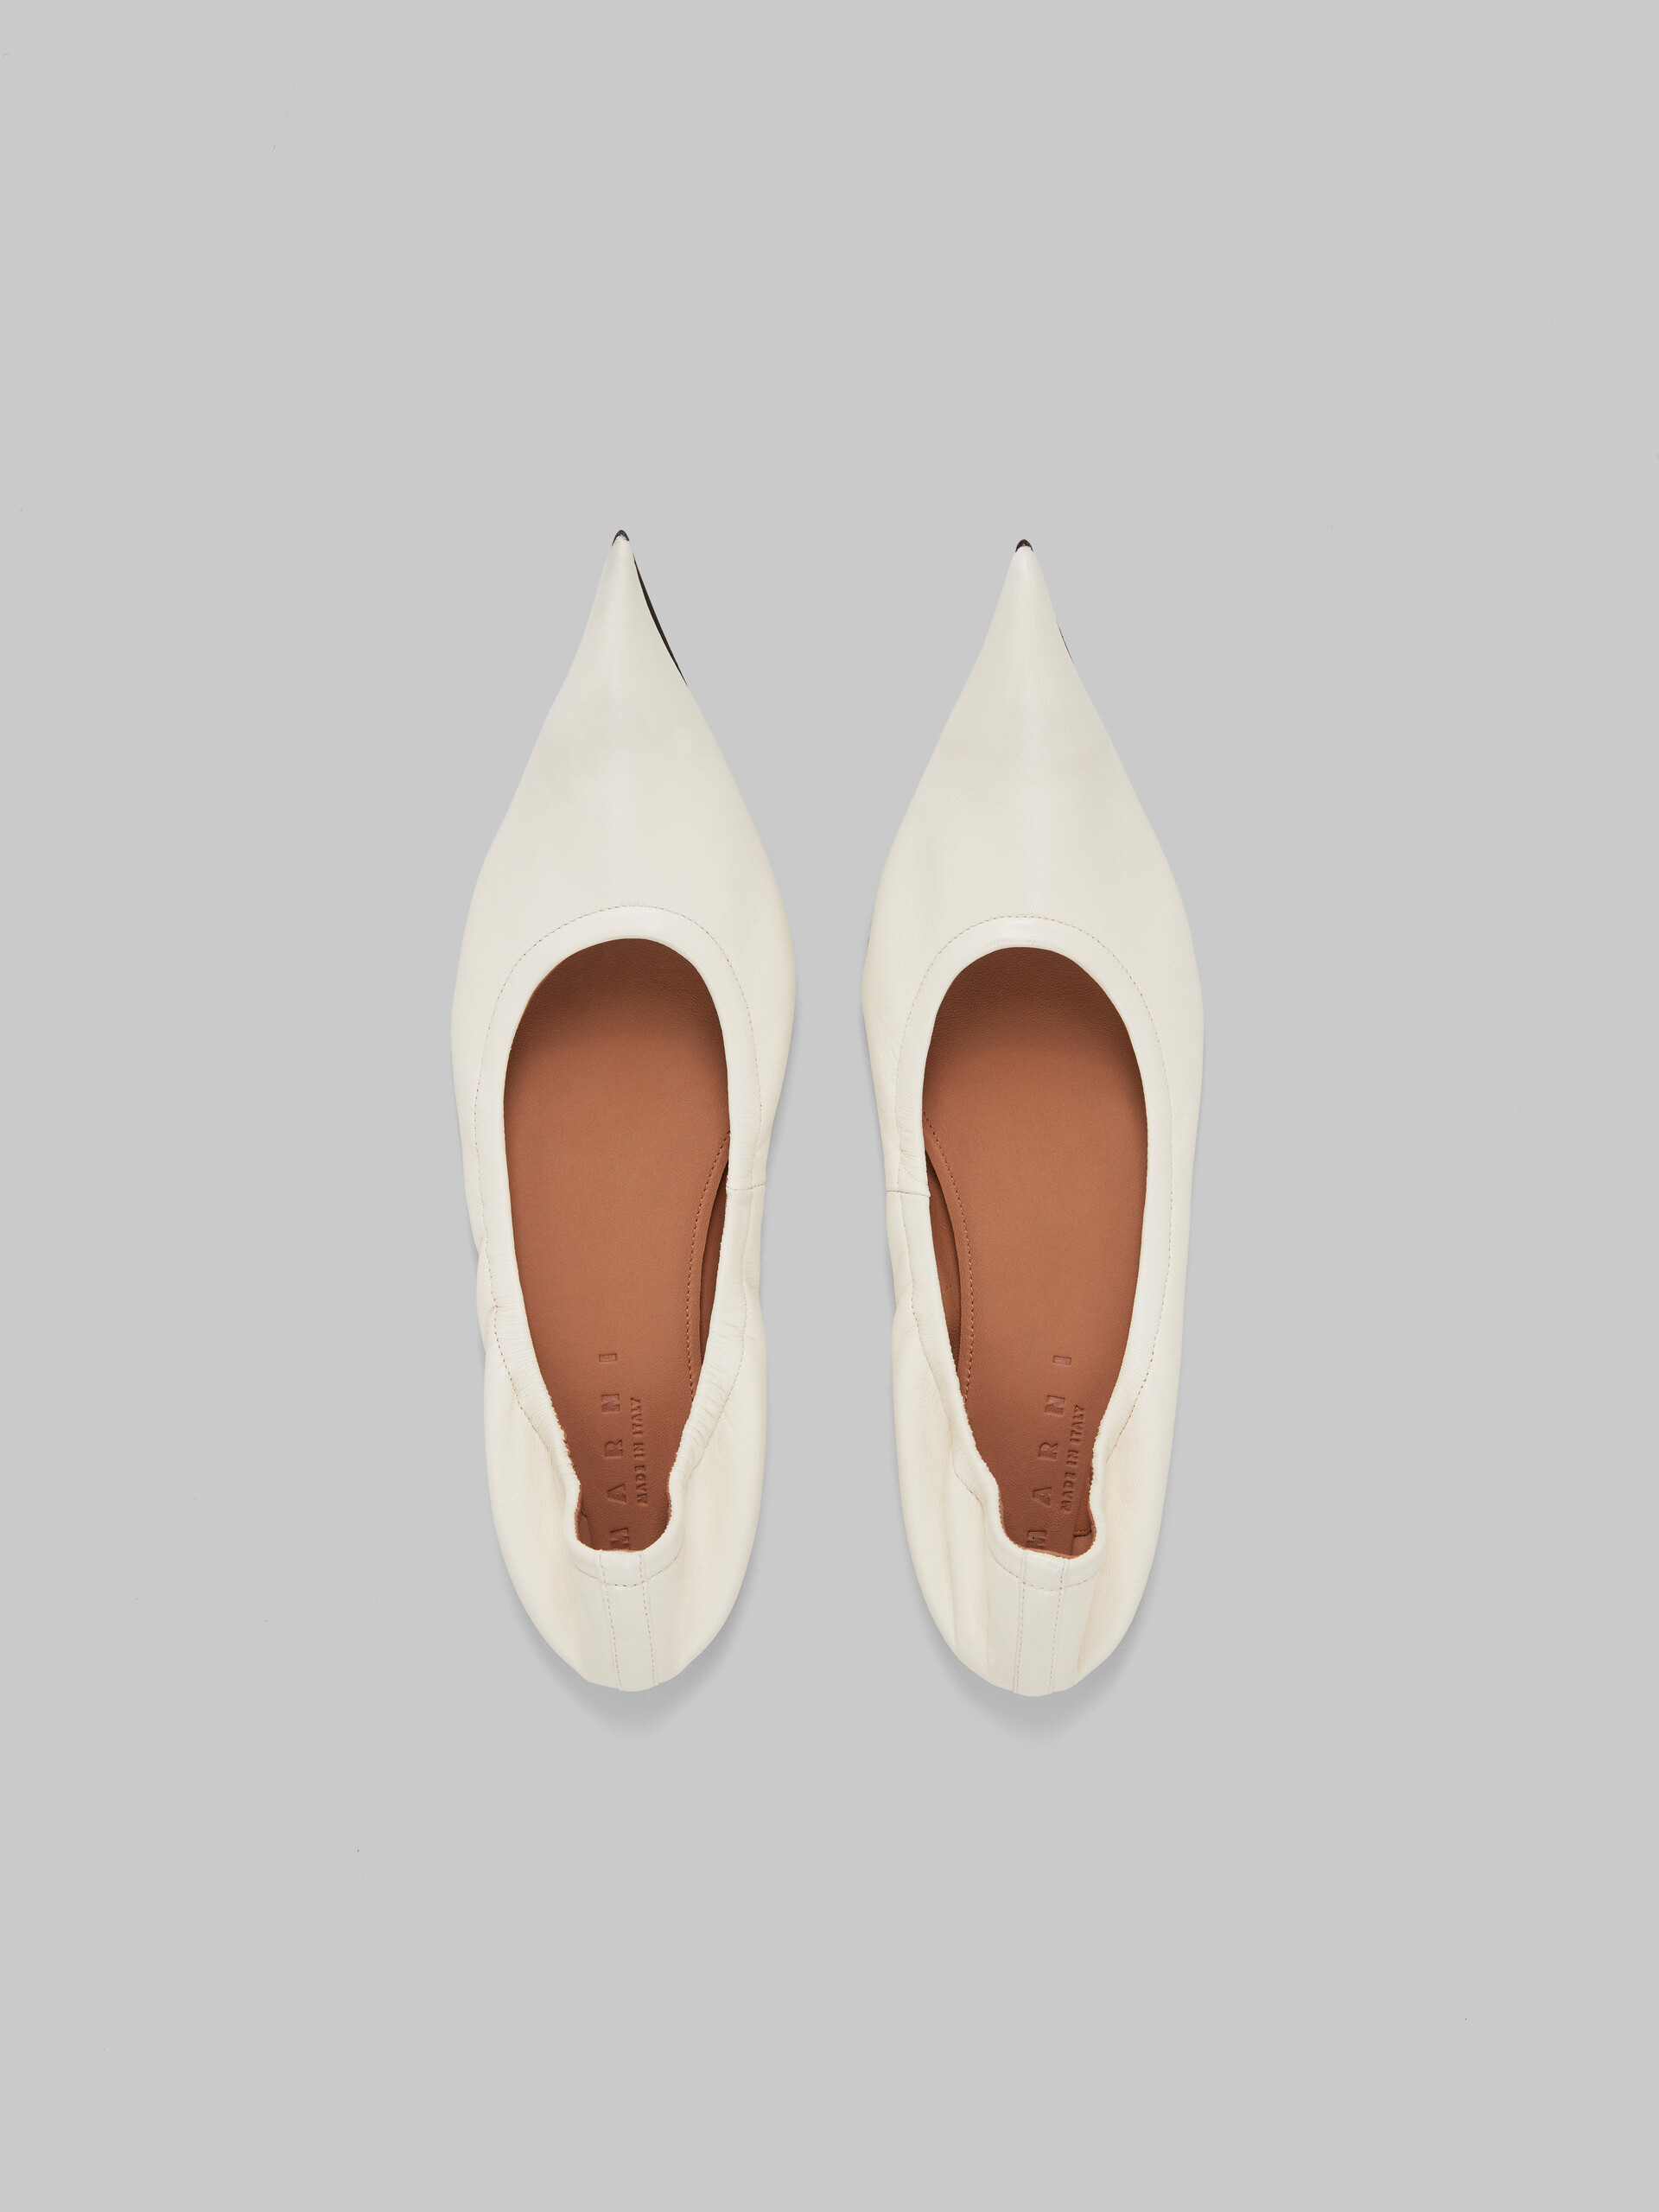 White nappa pointed-toe ballet flats - Ballet Shoes - Image 4